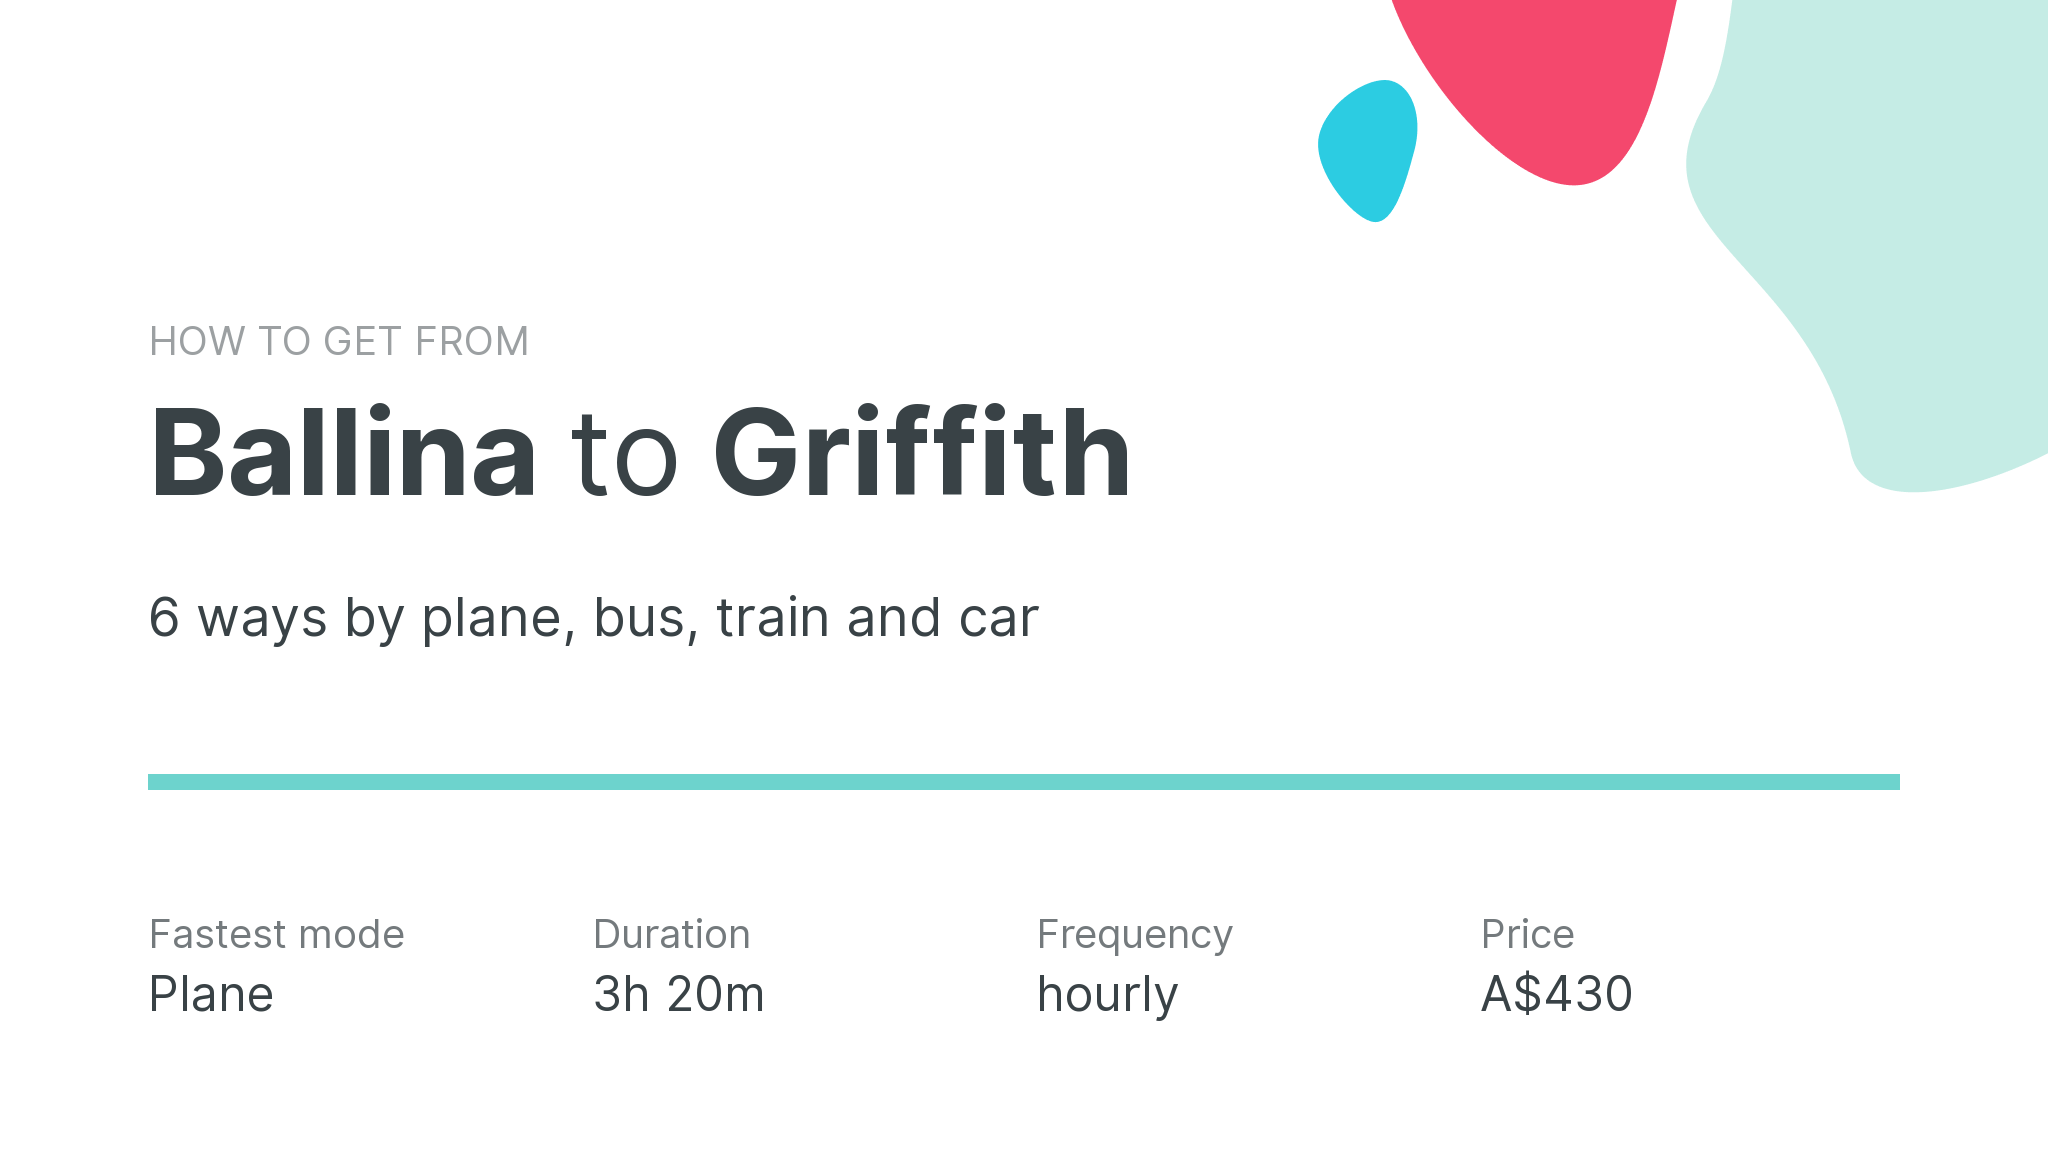 How do I get from Ballina to Griffith